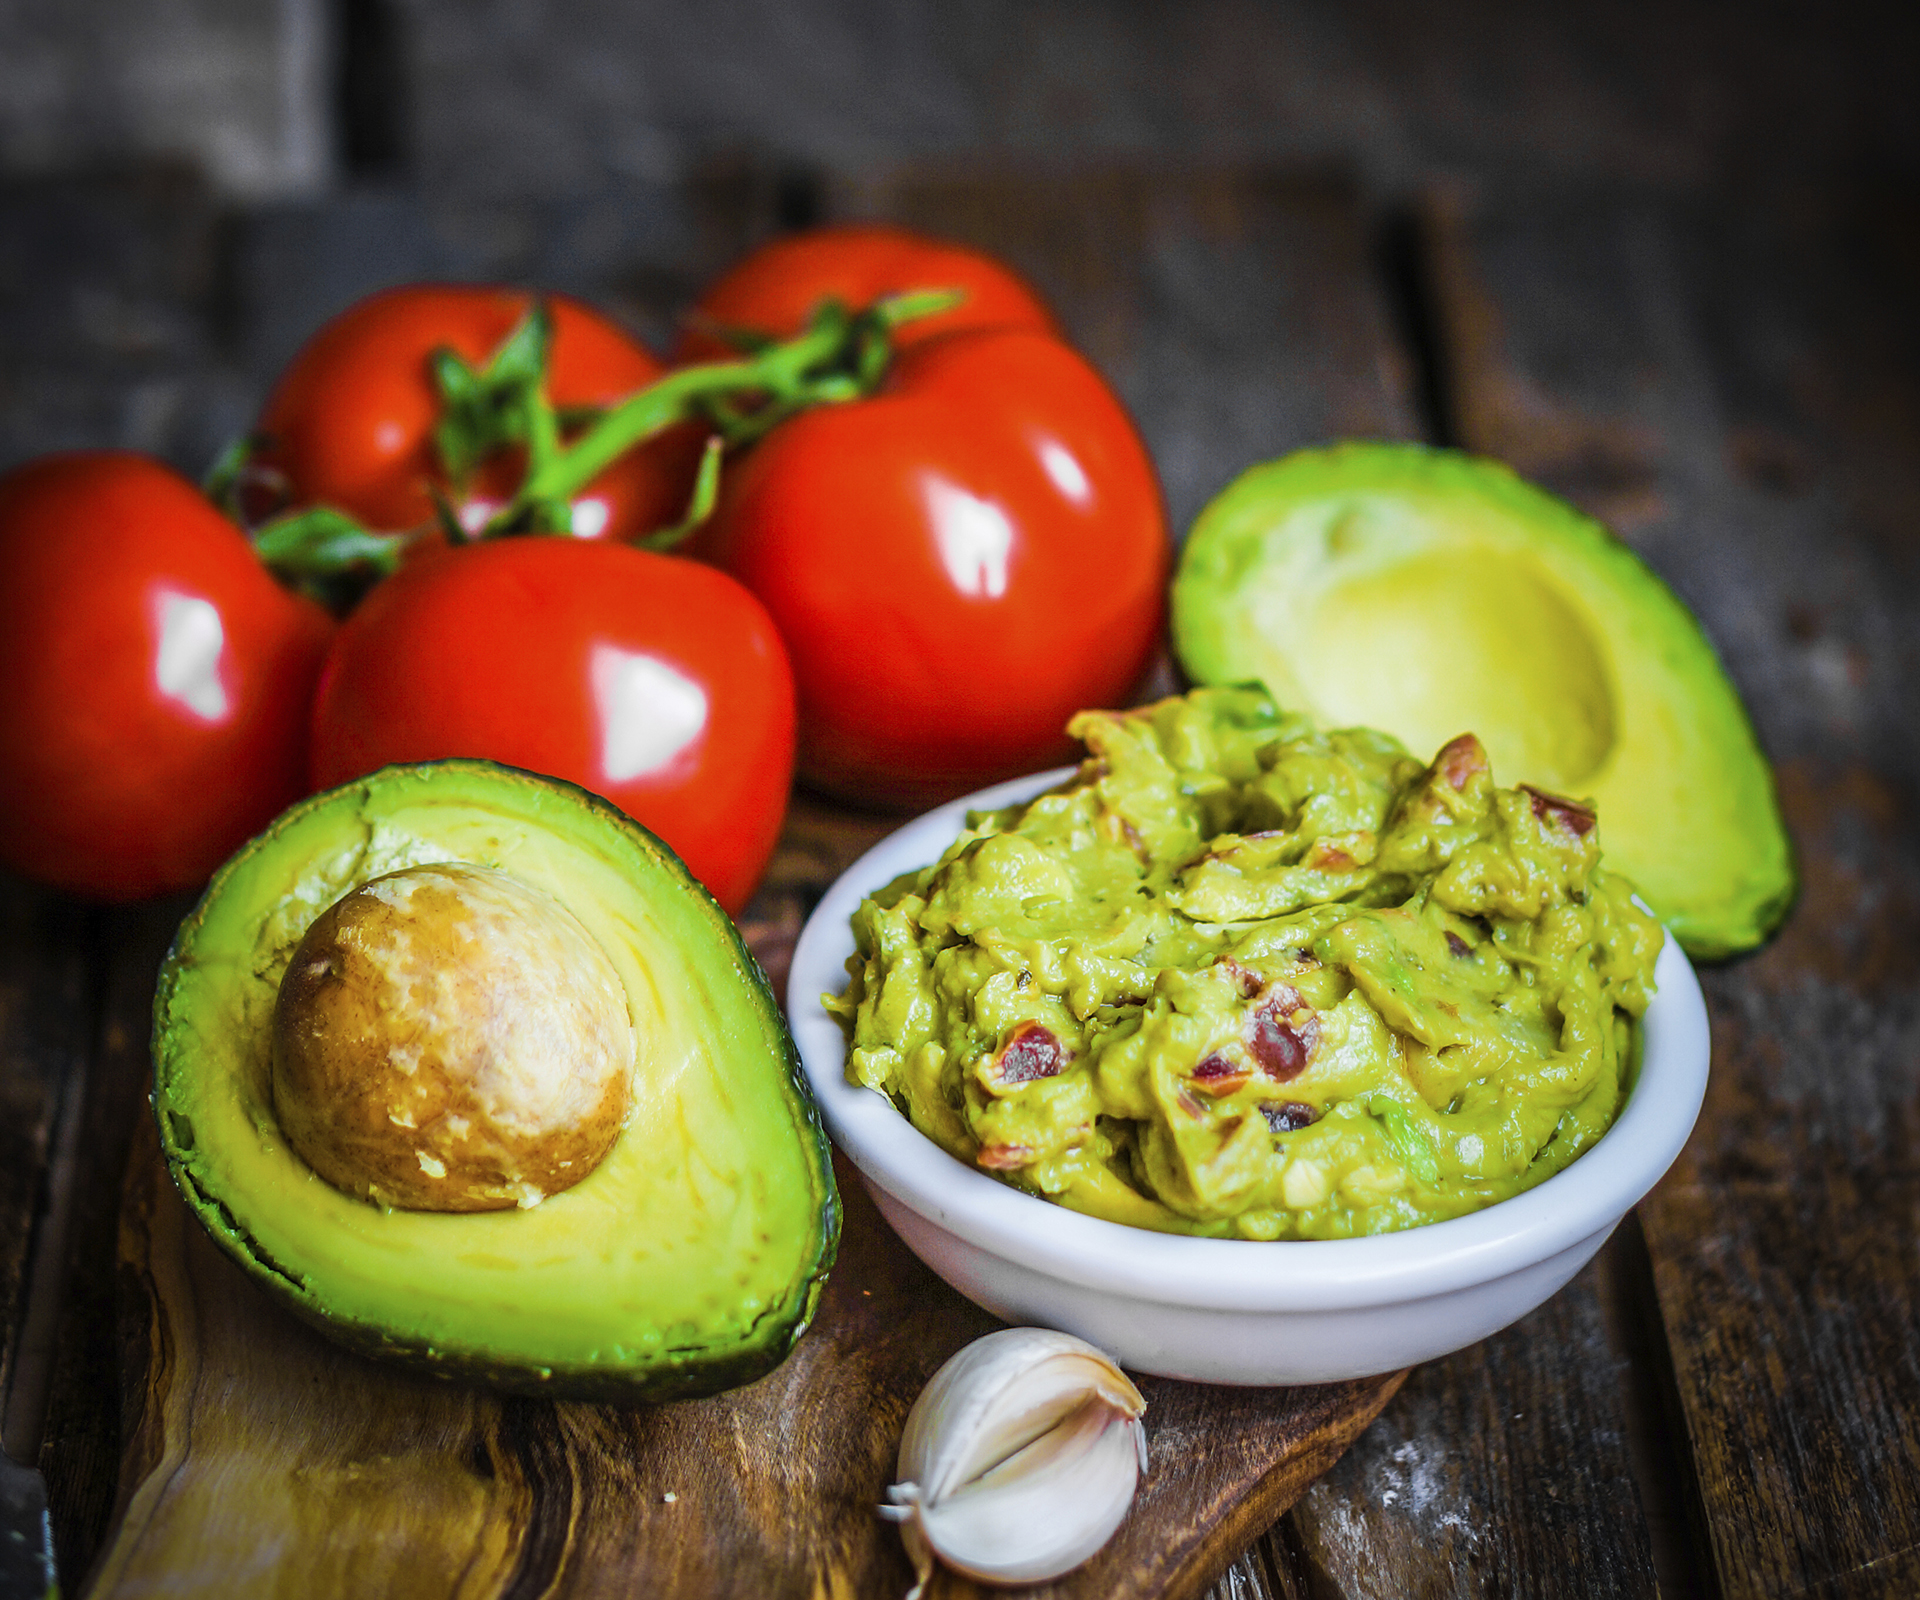 New York Times suggests putting peas in guacamole; whole world revolts in disgust